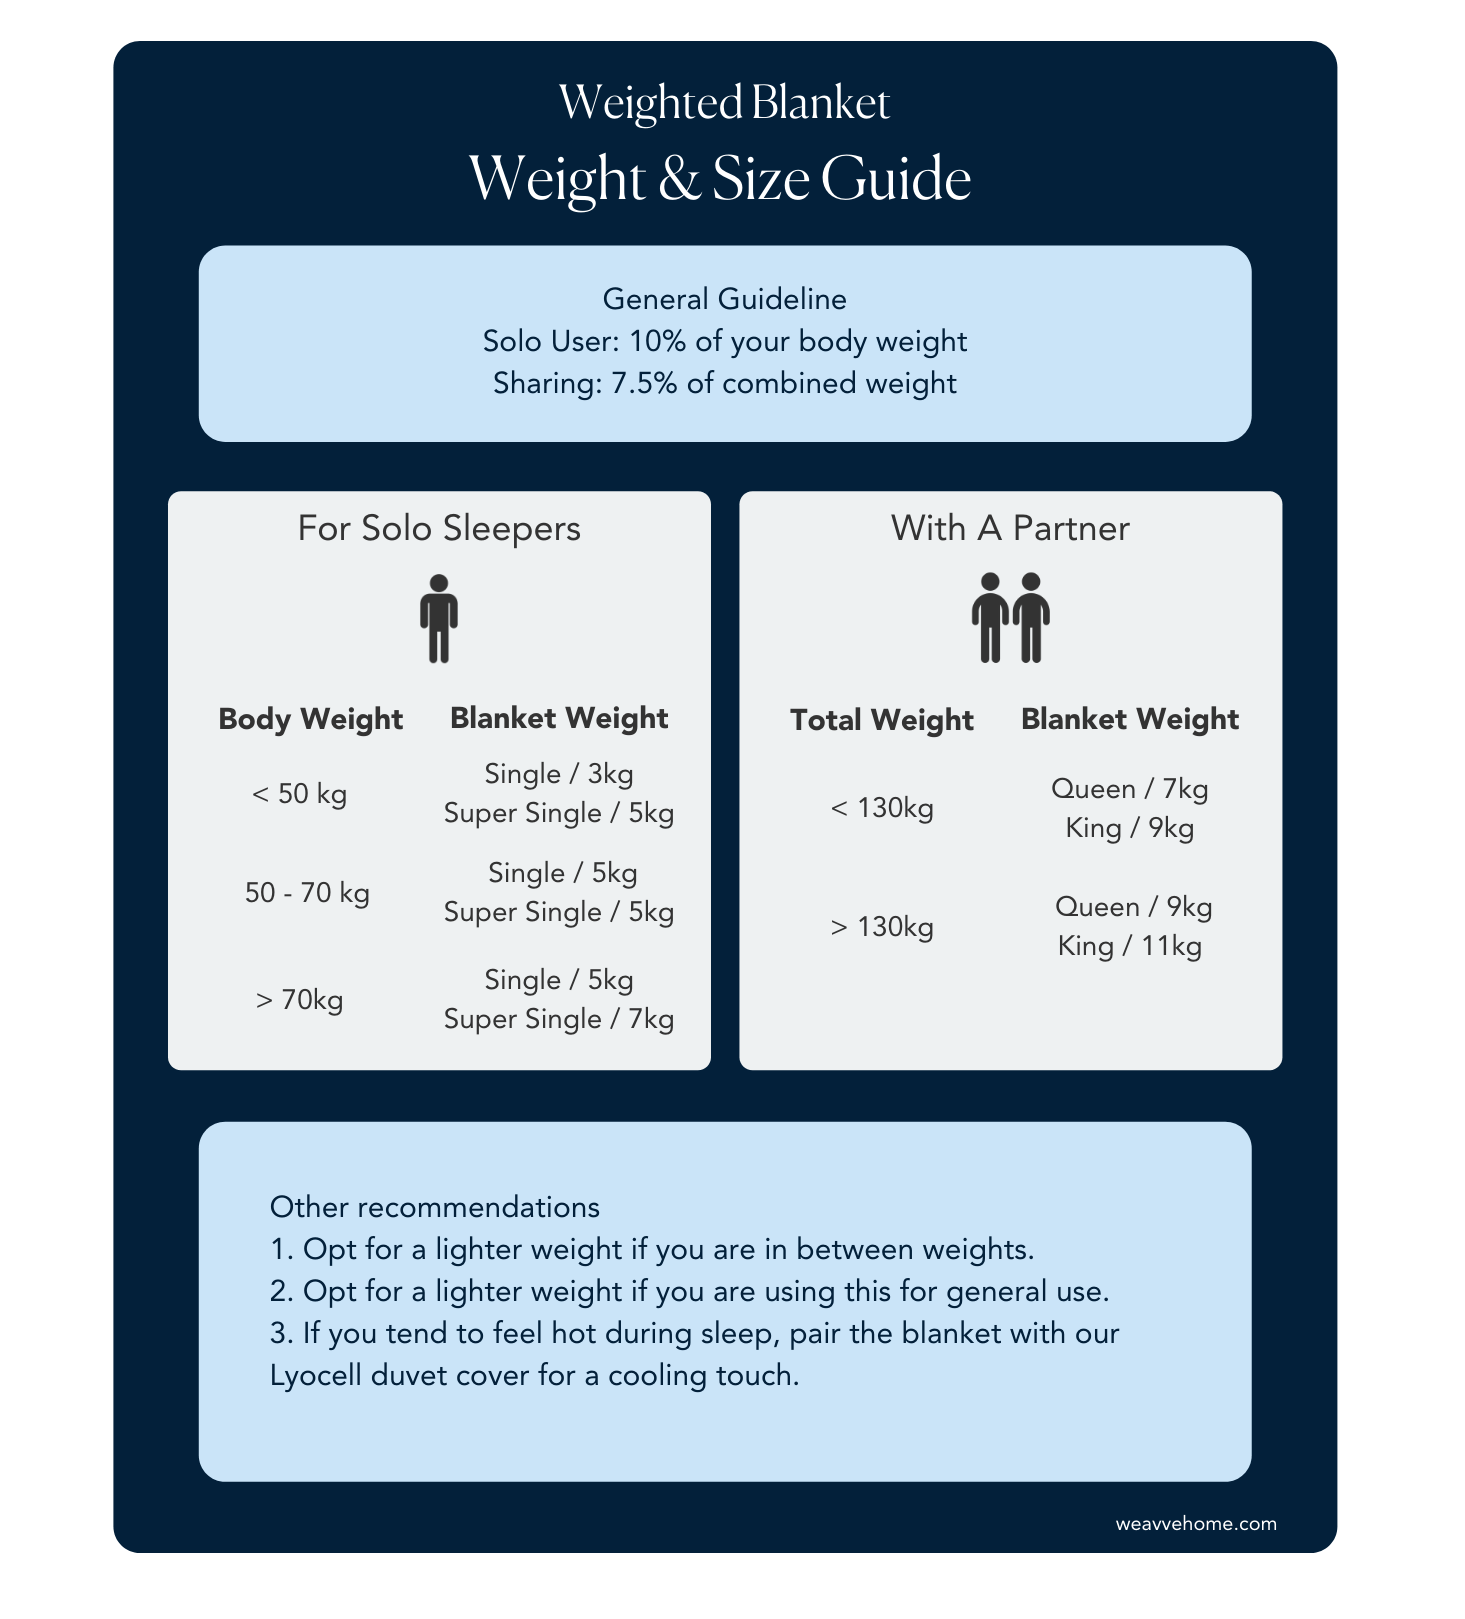 Weavve’s Weight & Size Guide for Weighted Blanket